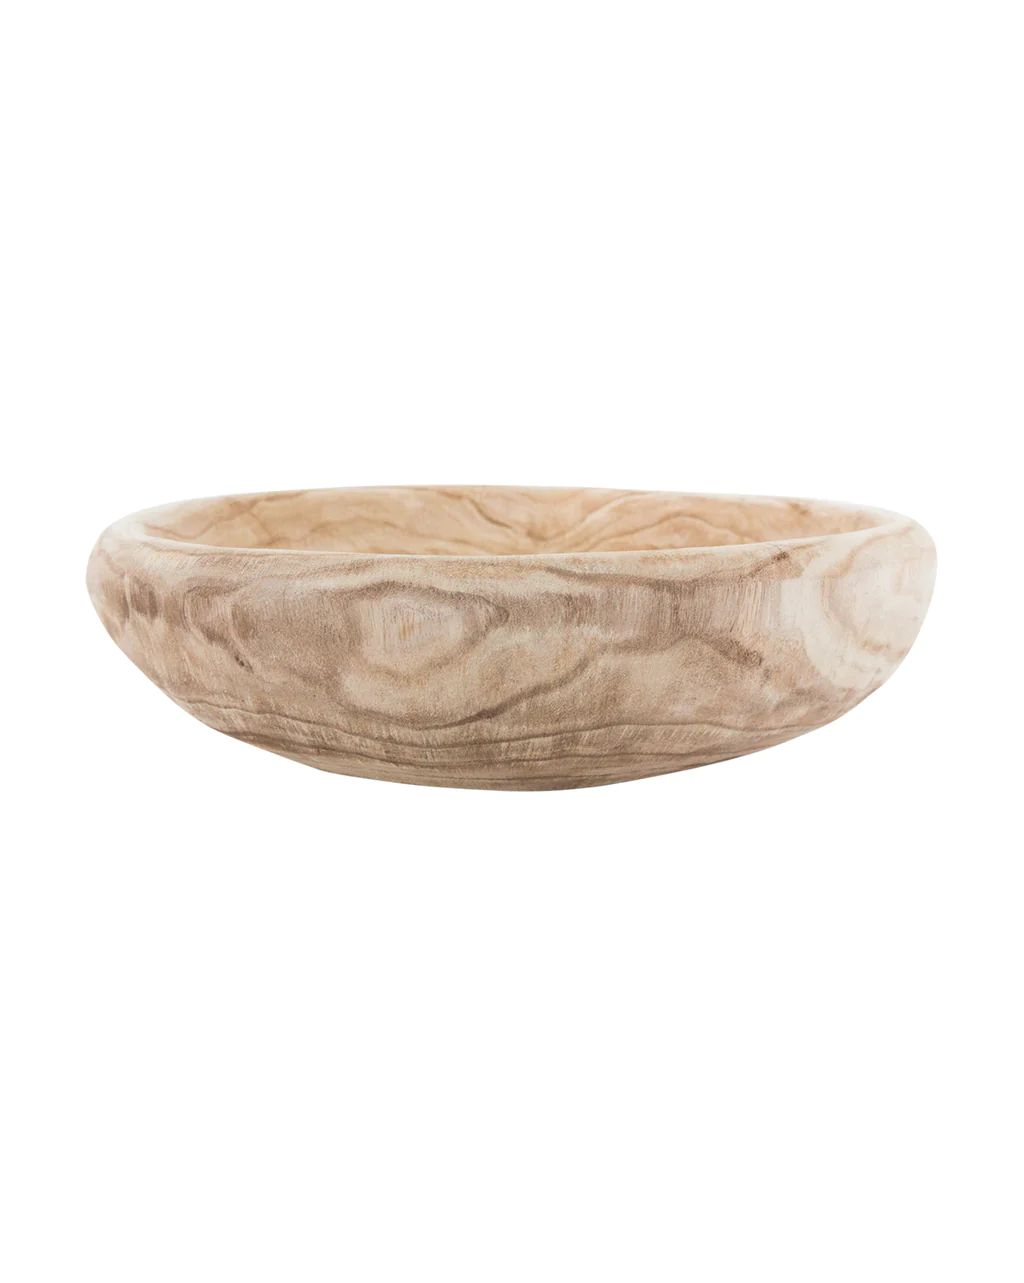 Simply Smooth Wooden Bowl | McGee & Co.